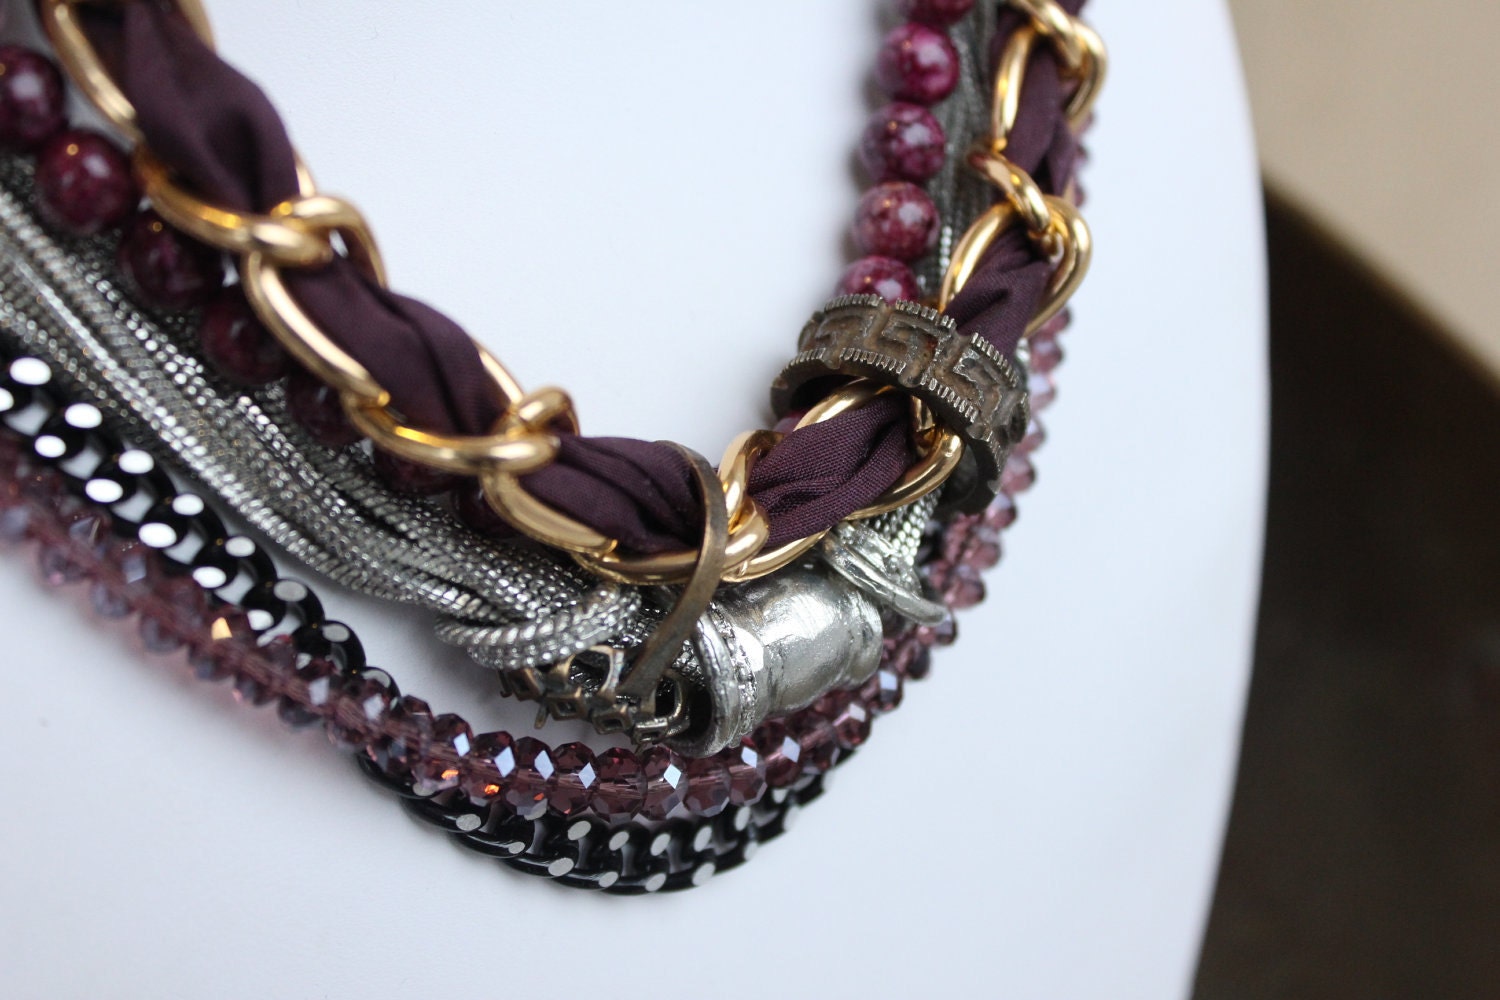 Eggplant Purple Statement Necklace with Chains, Vintage Rings and Silk